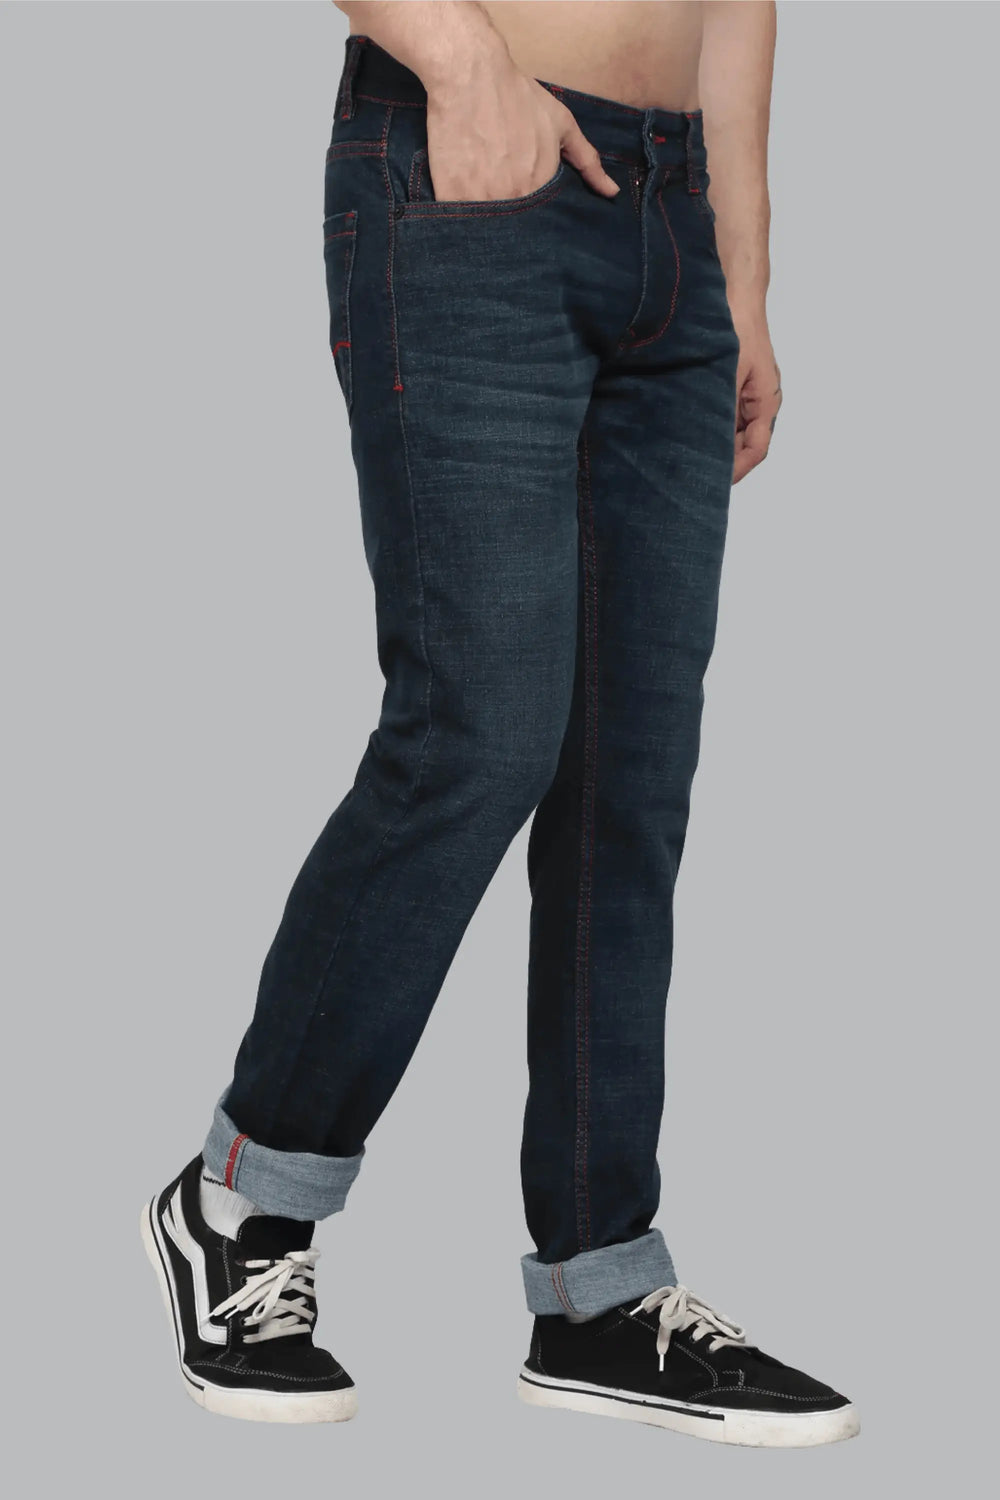 Relaxed Fit Navy Blue Tint Denim Jeans For men - Peplos Jeans 